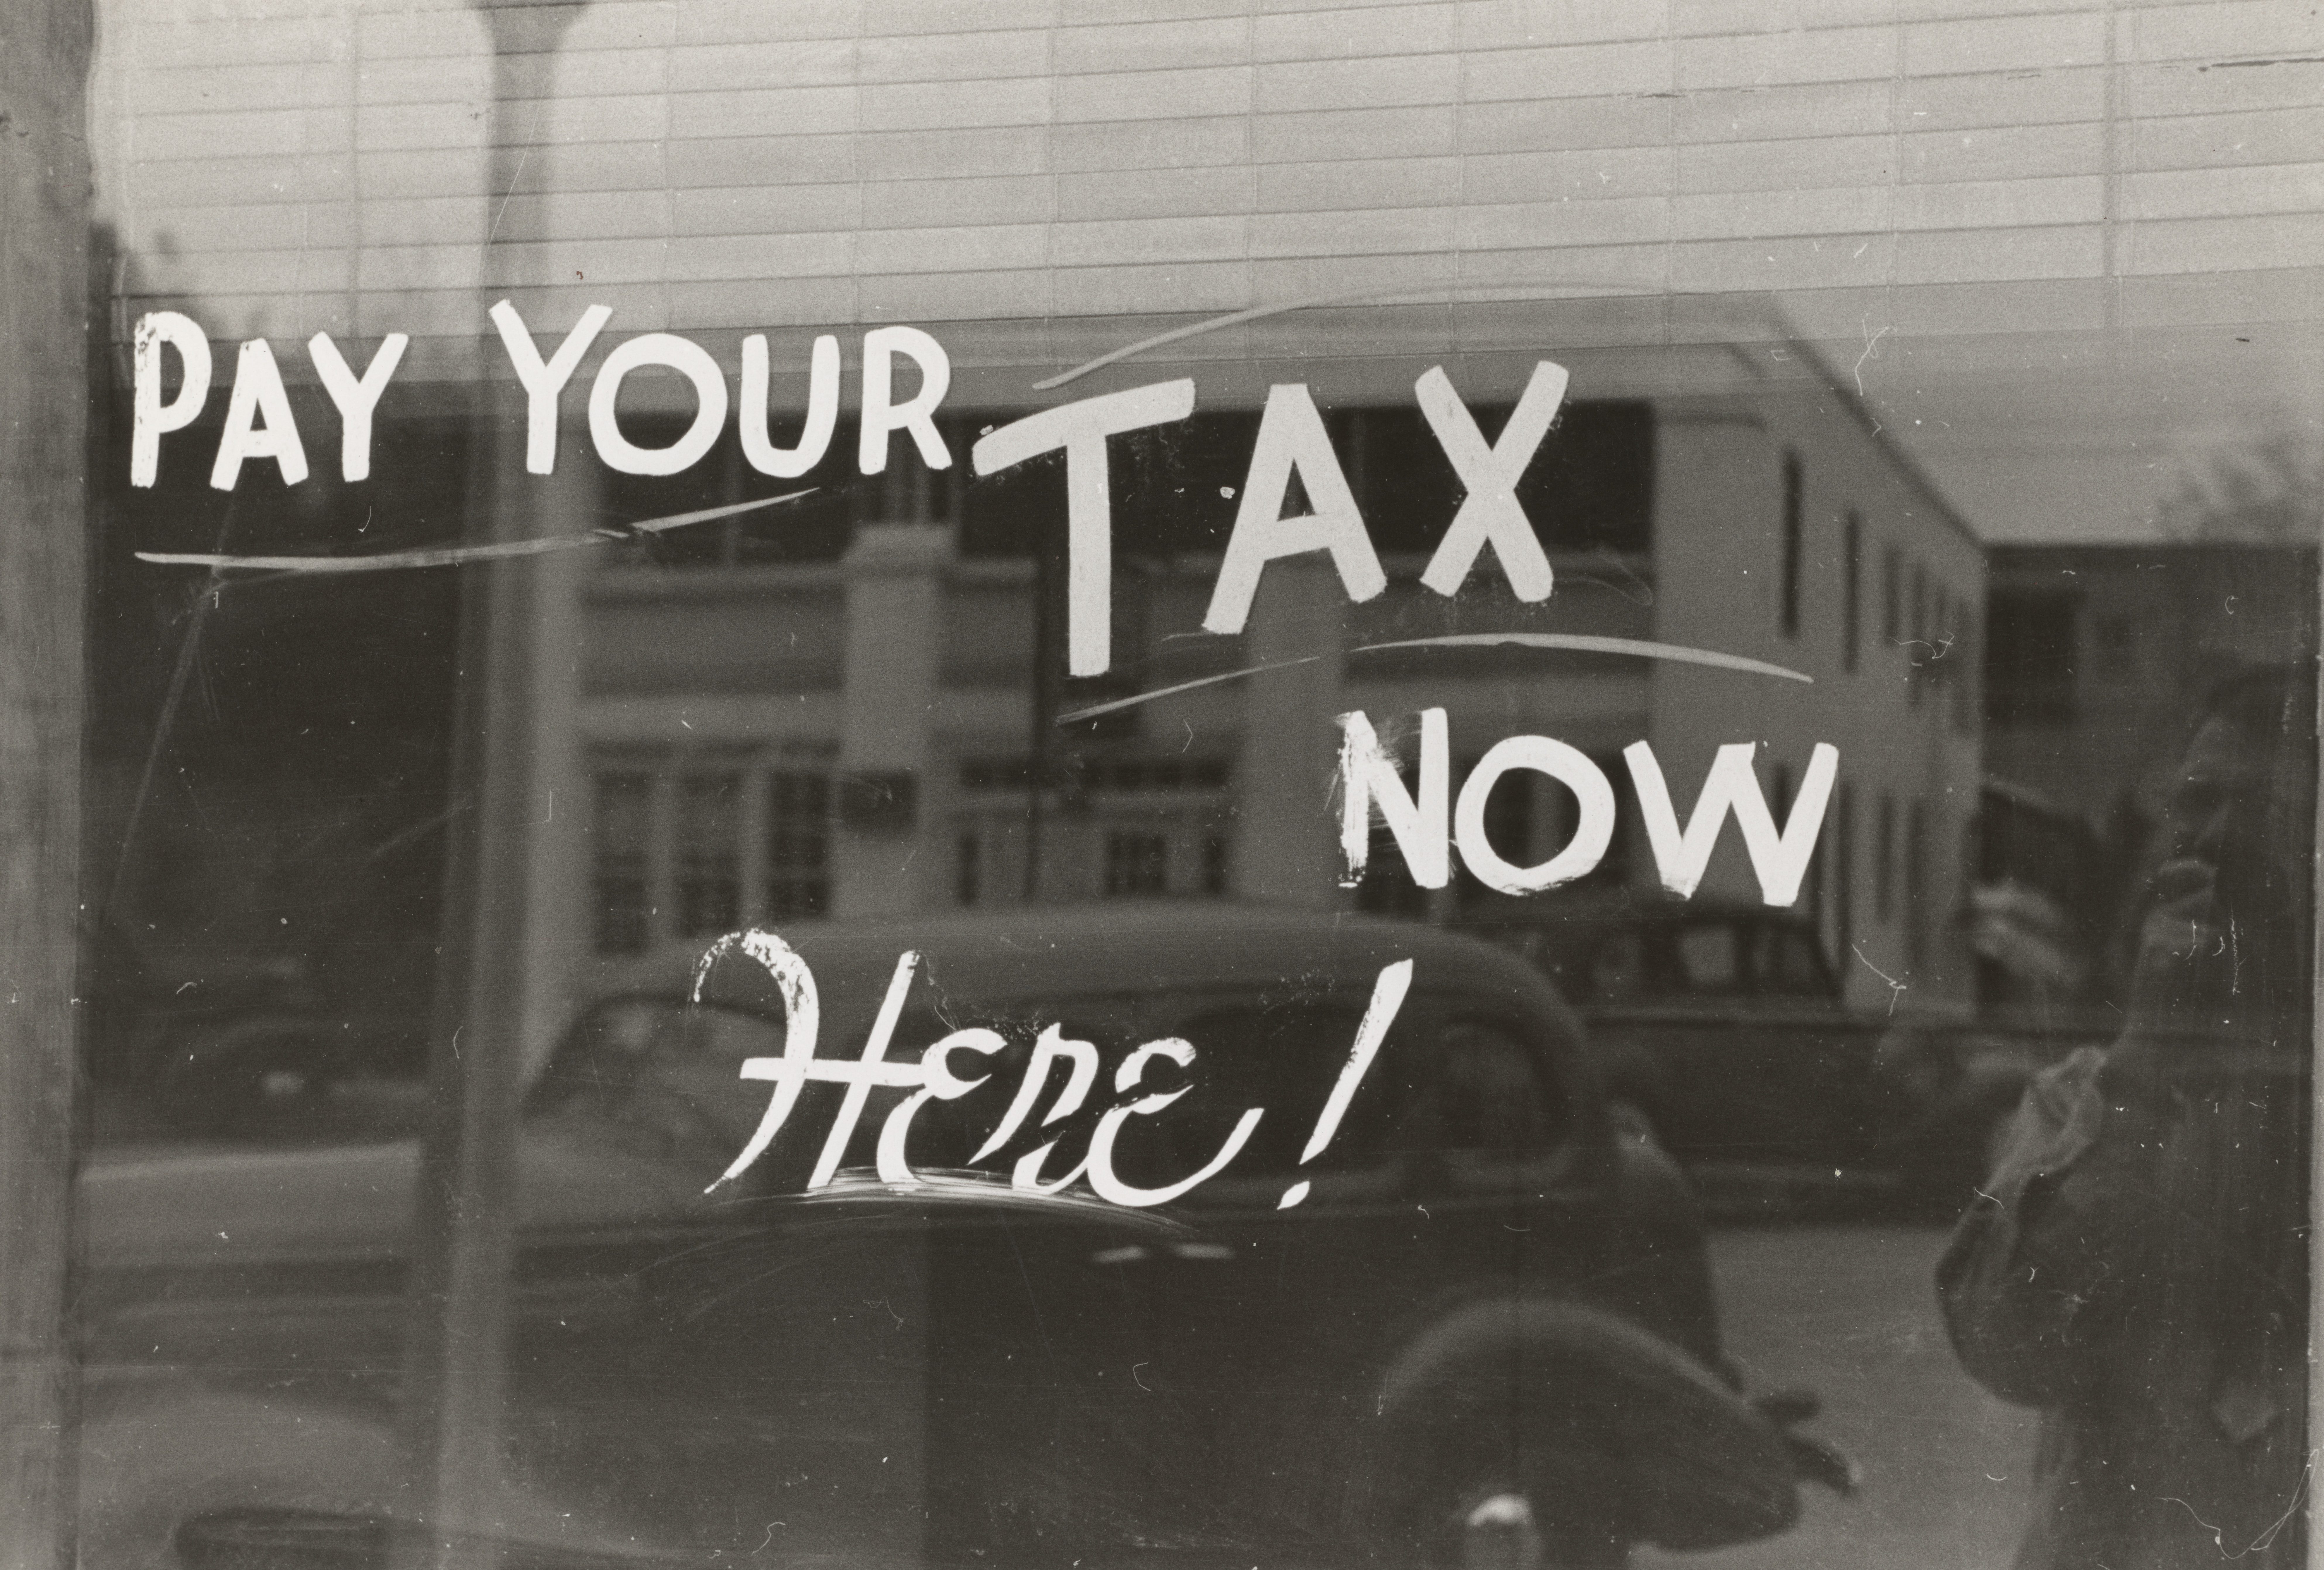 Pay your tax now window message